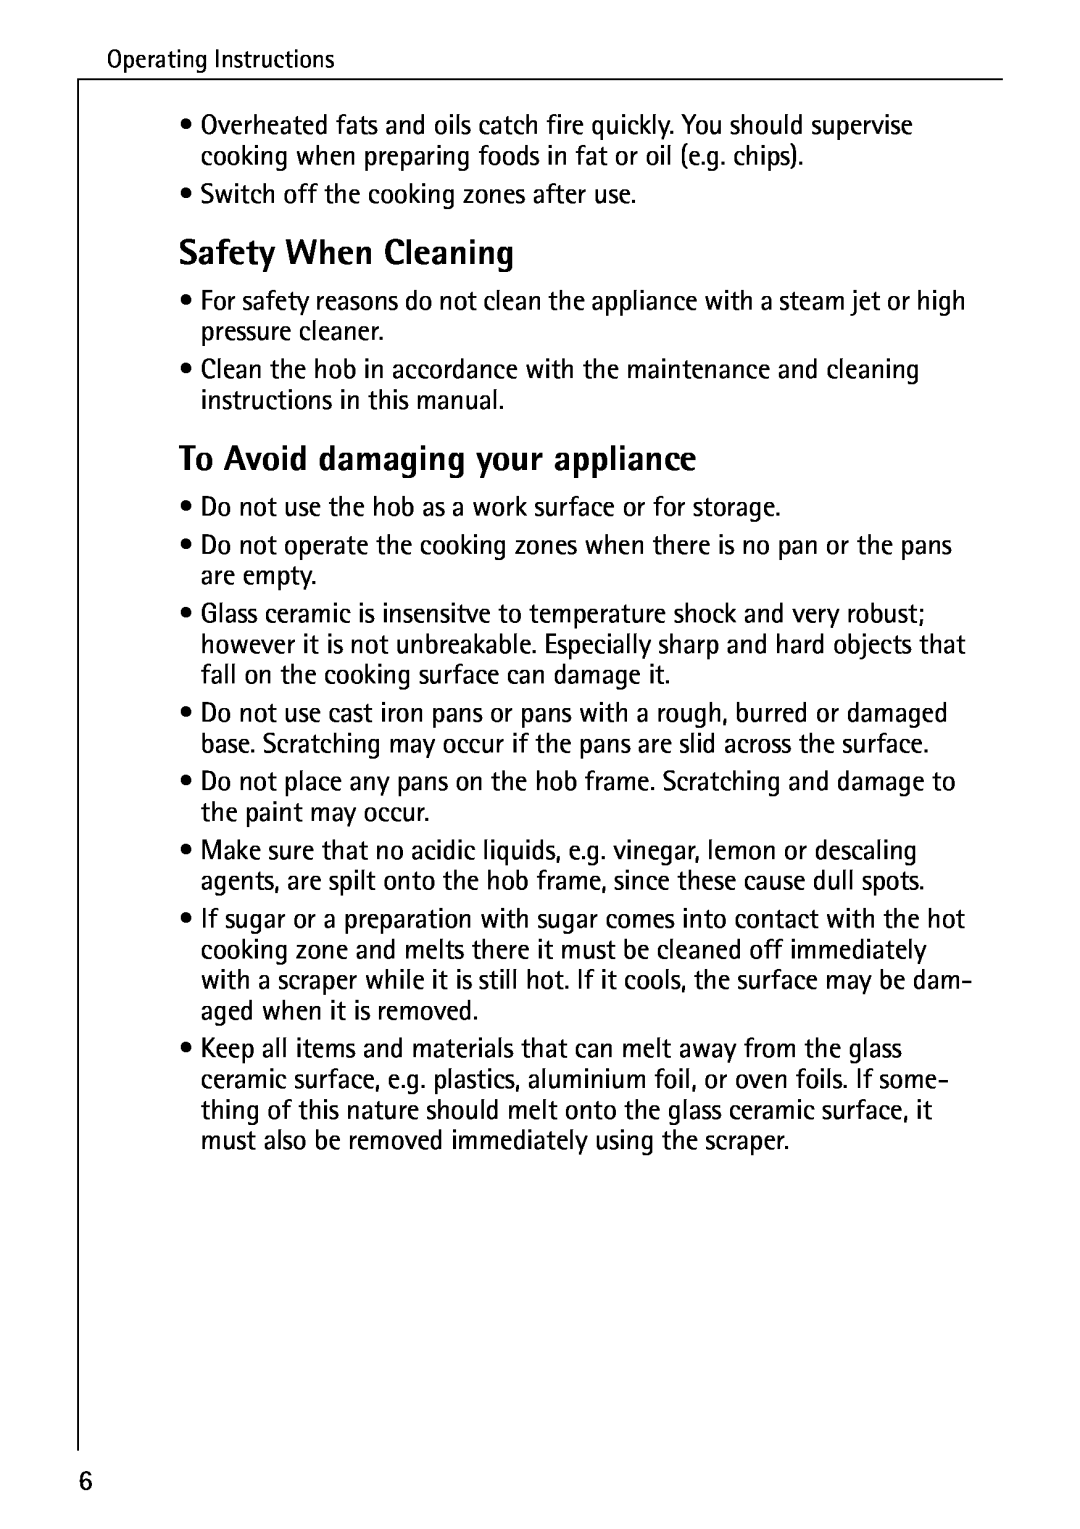 Electrolux C65030K operating instructions Safety When Cleaning, To Avoid damaging your appliance 